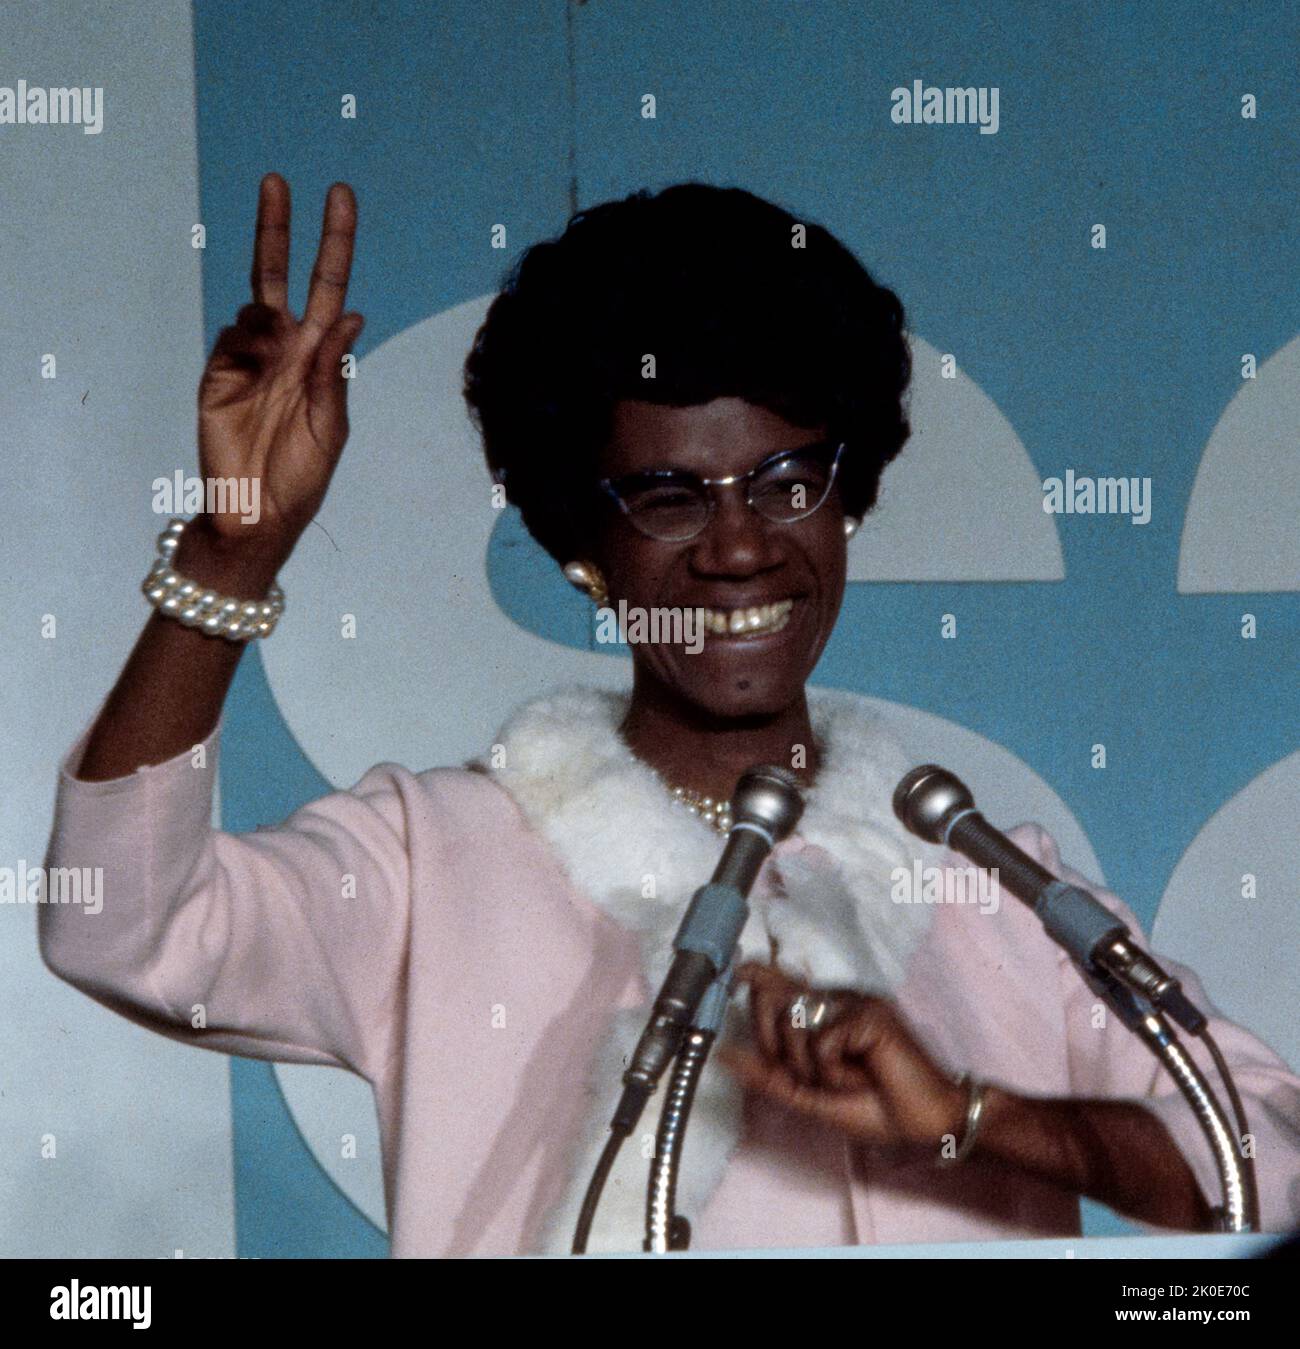 Shirley Anita Chisholm (1924 - 2005) American politician. In 1968, she became the first black woman elected to the United States Congress. In the 1972 United States presidential election, she became the first black candidate to run for a major party's nomination for President of the United States, and the first woman to run for the Democratic Party's presidential nomination. Stock Photo